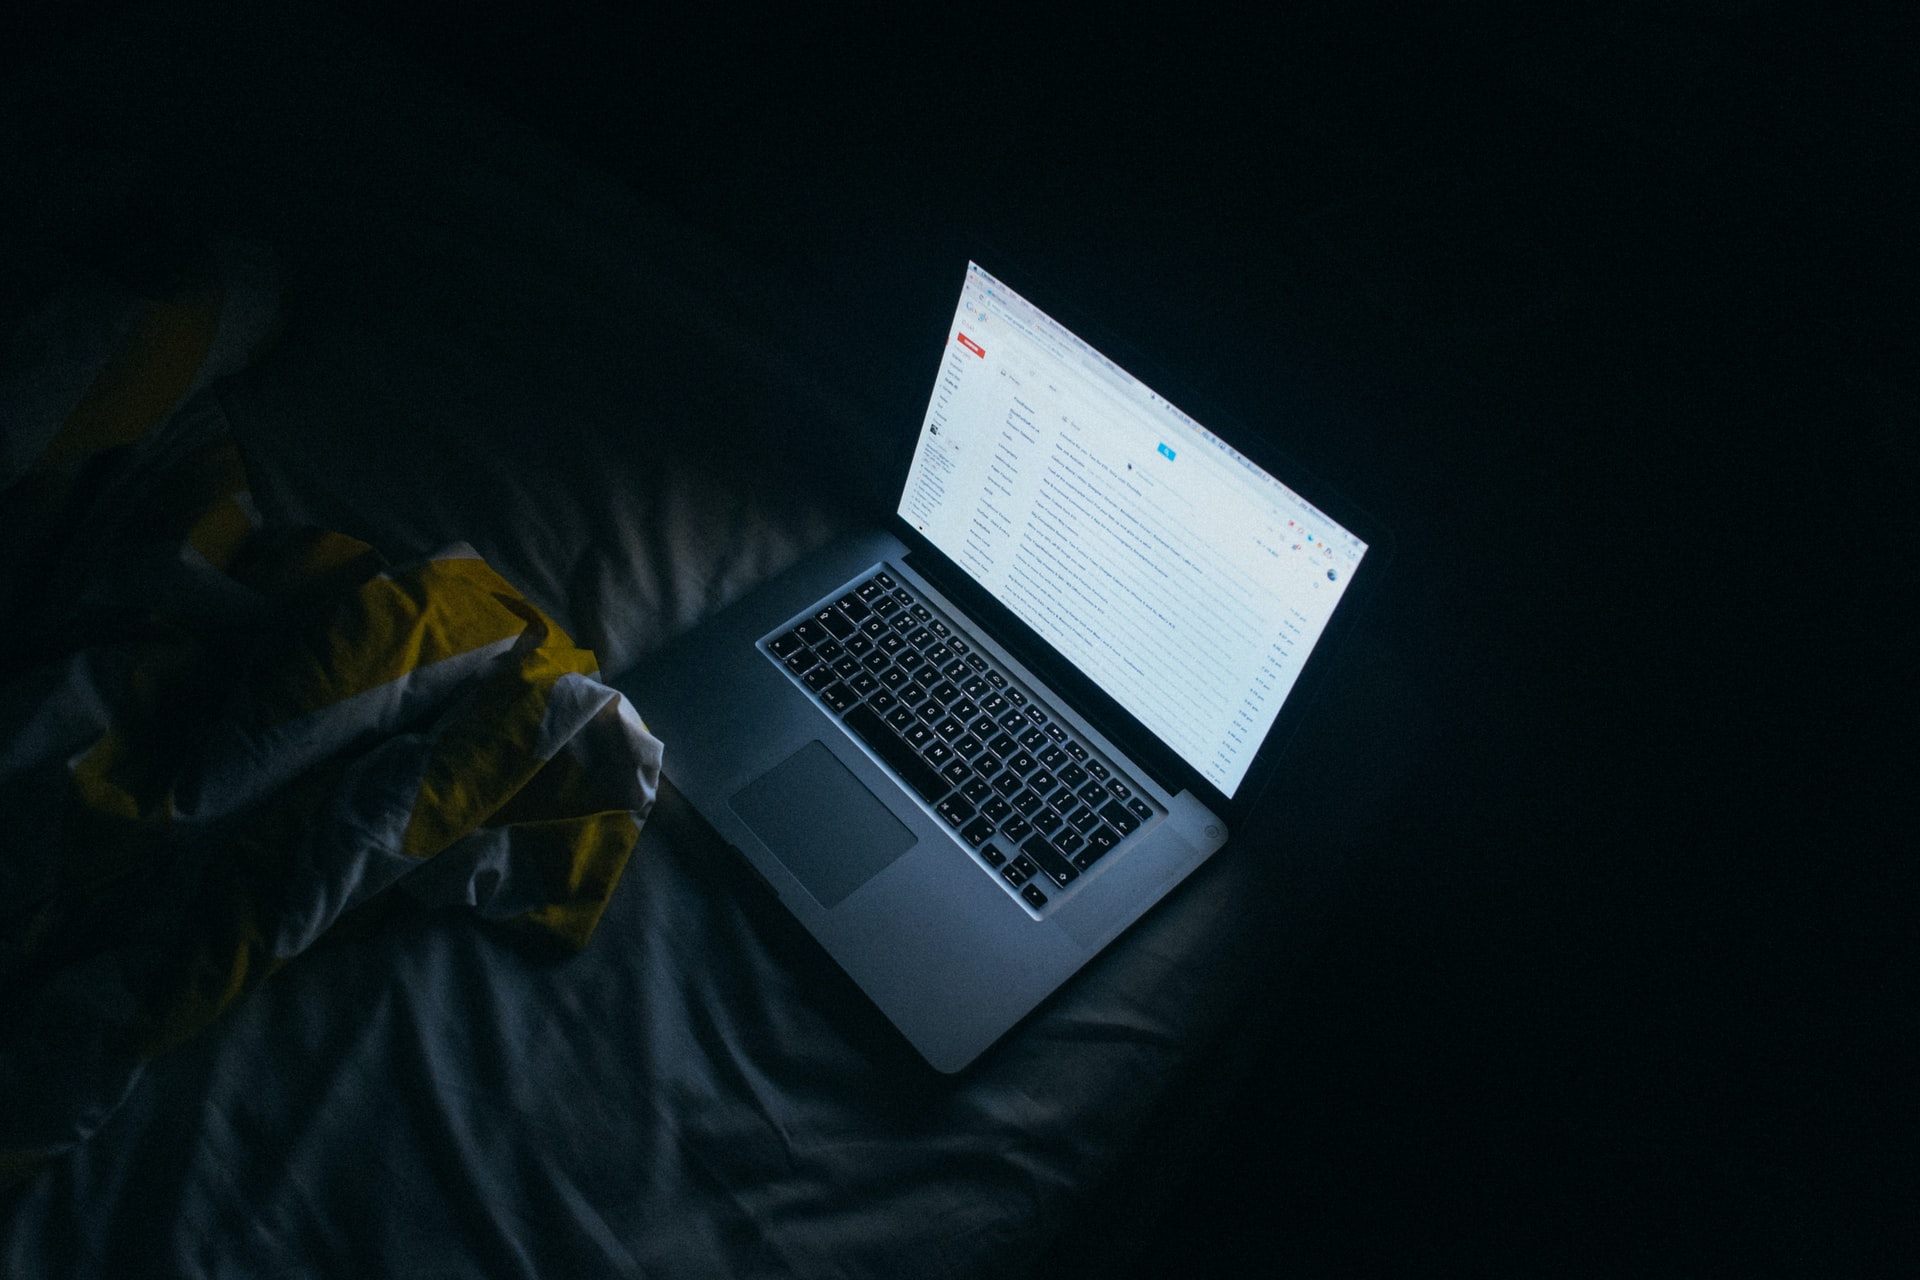 Laptop in bed at night